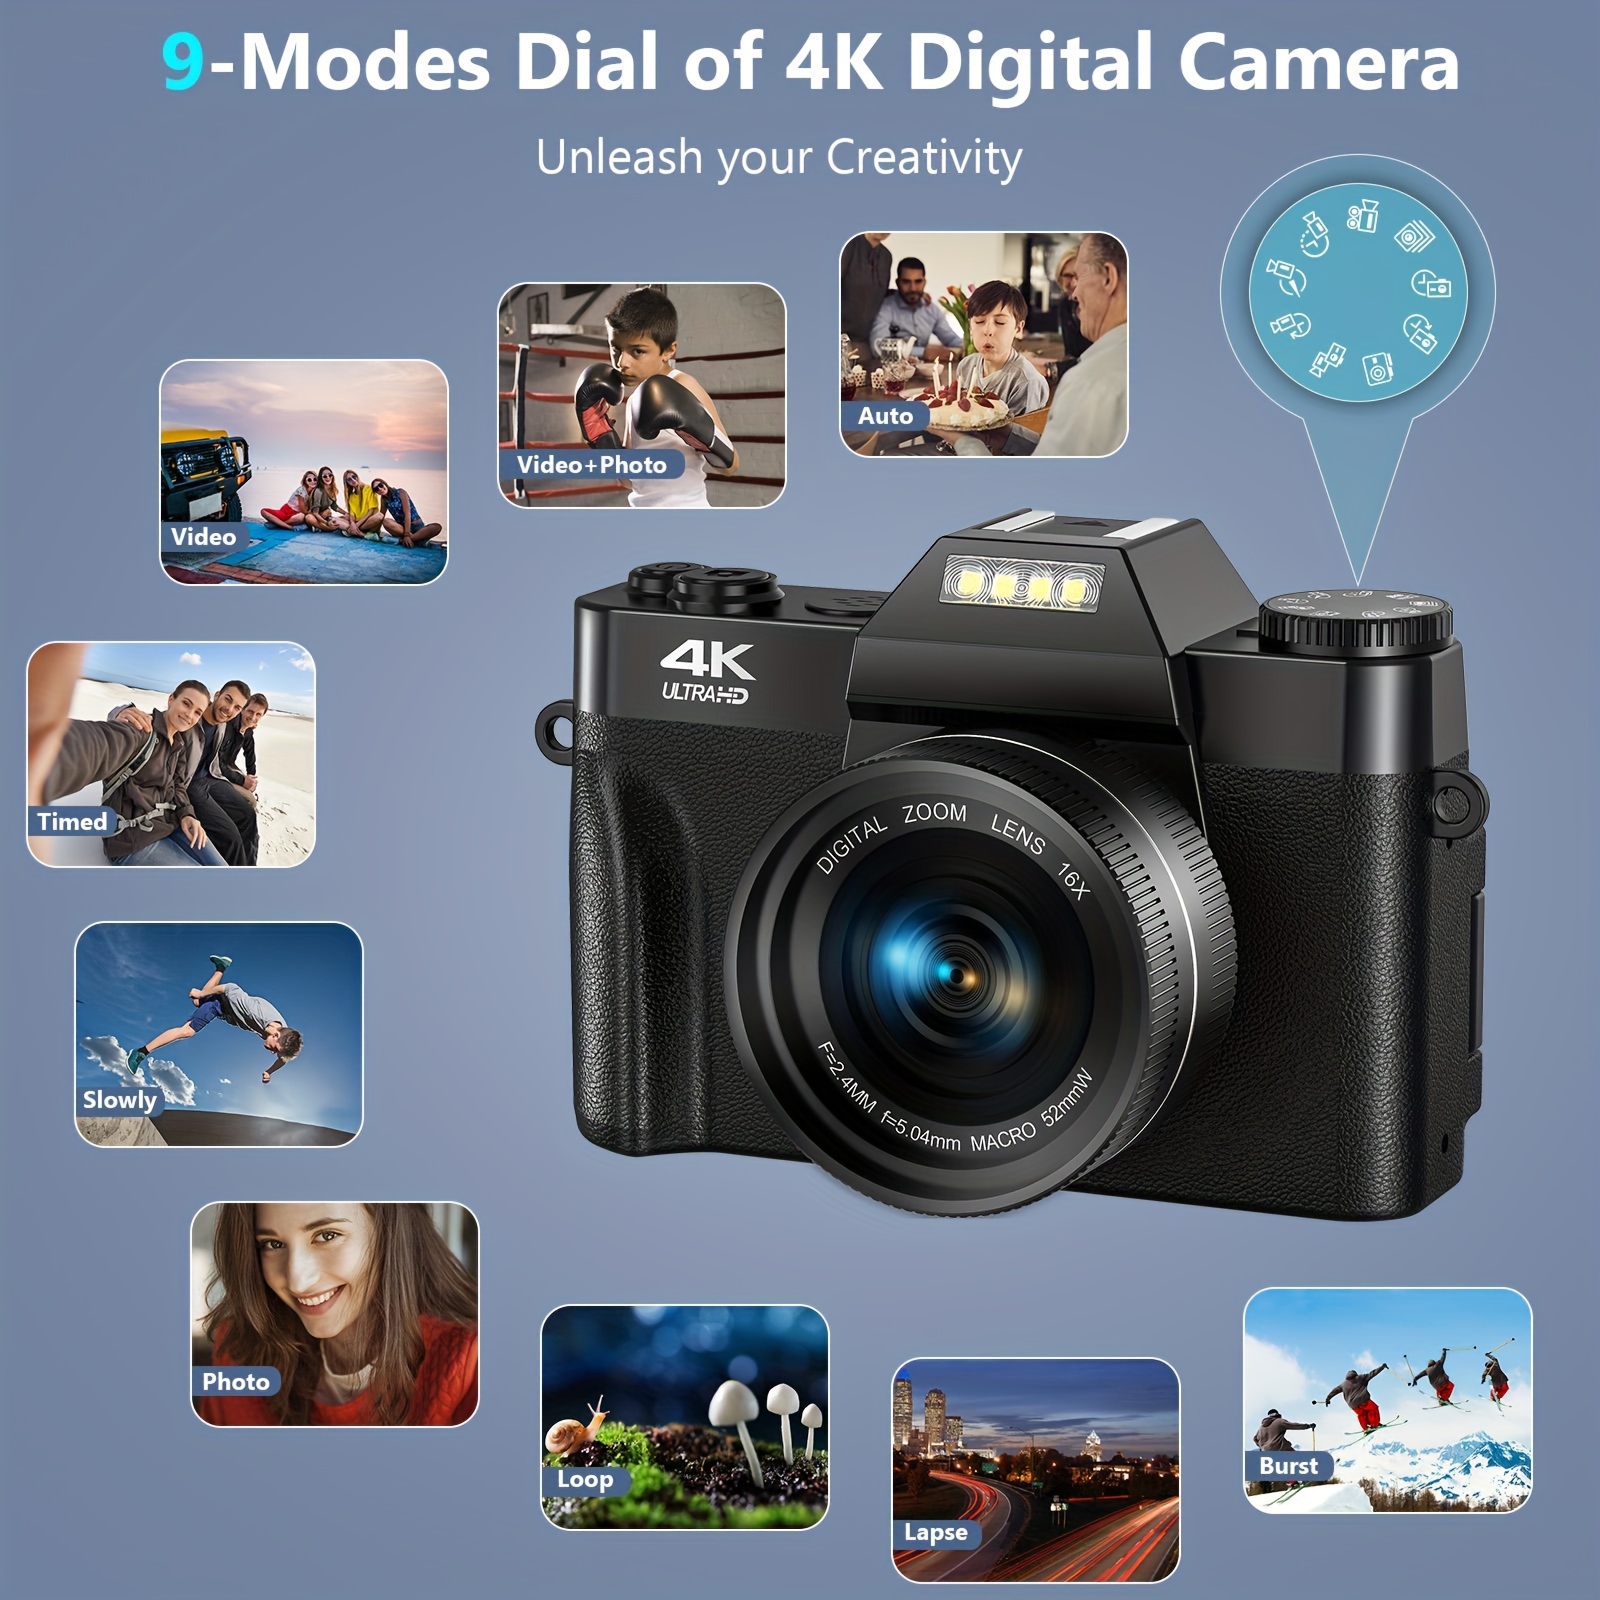 

4k Autofocus Digital Camera For Kids-56mpvlogging Camera For With 16x Digitalzoom, 3.0"180-degree Flip Screen, Built-inflash, Includes 32gb Sd Card And 2 Batteriesperfect For Teens And Students